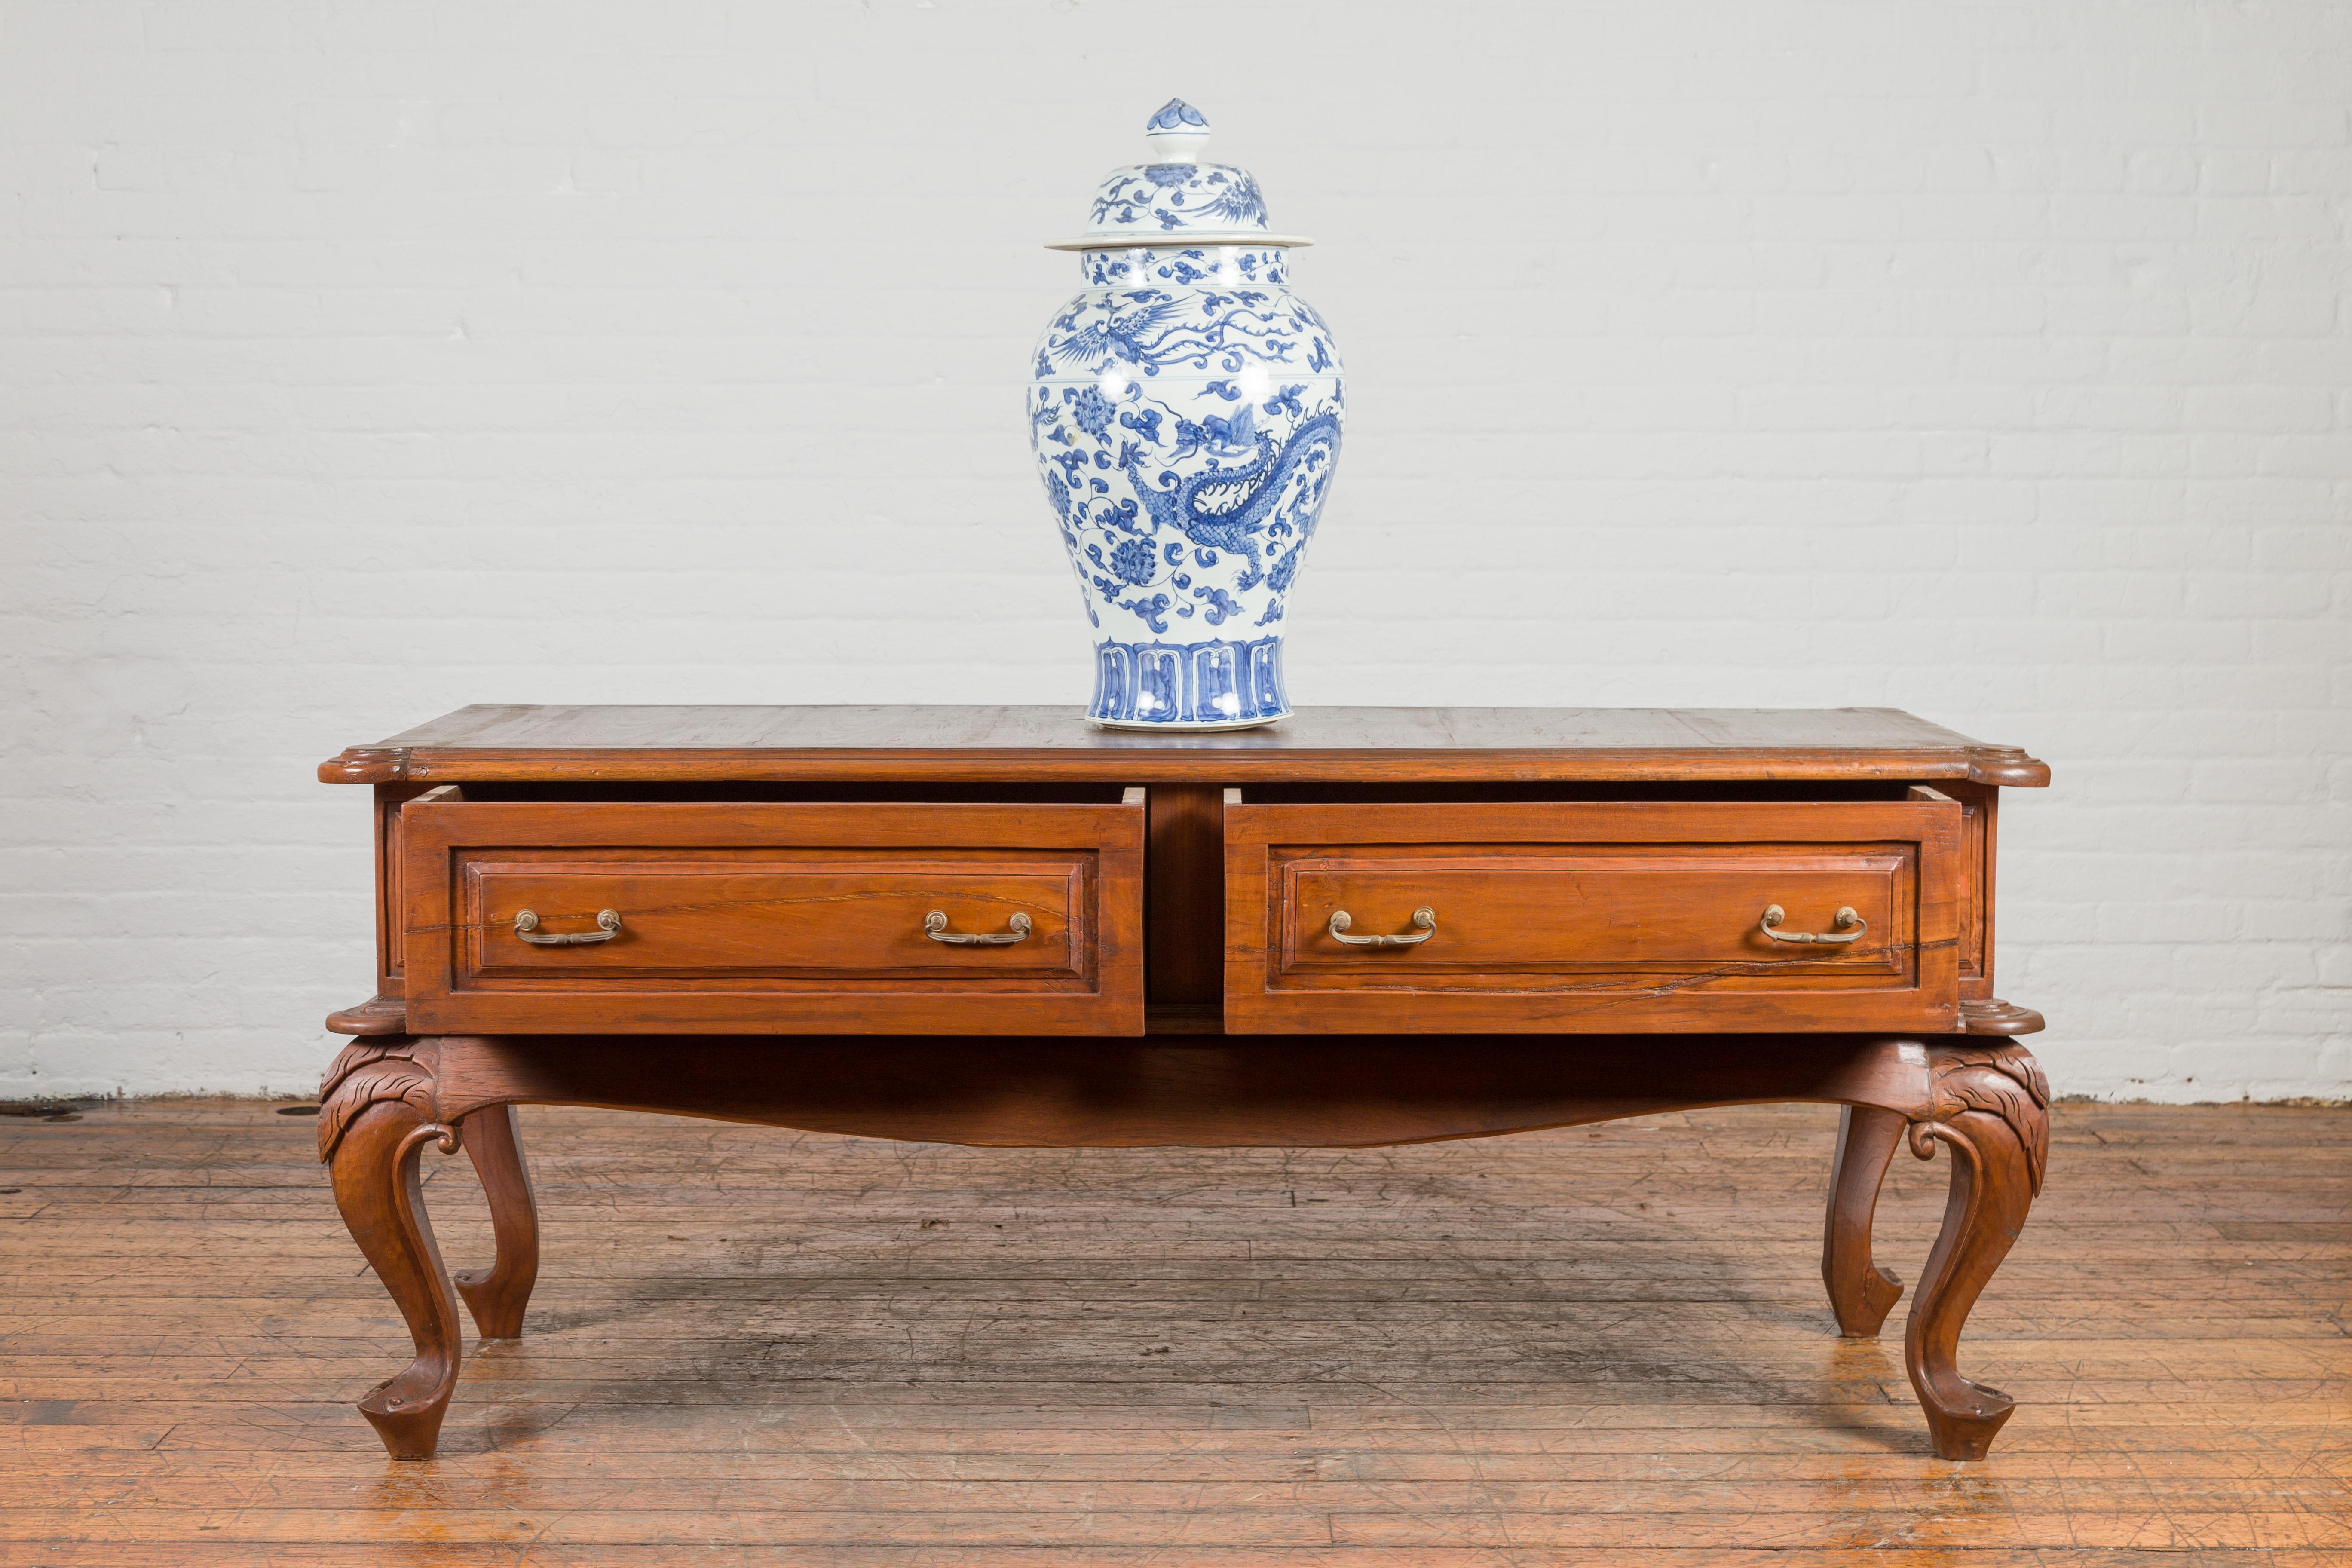 Dutch Colonial Early 20th Century Low Table with Two Drawers and Cabriole Legs In Good Condition For Sale In Yonkers, NY